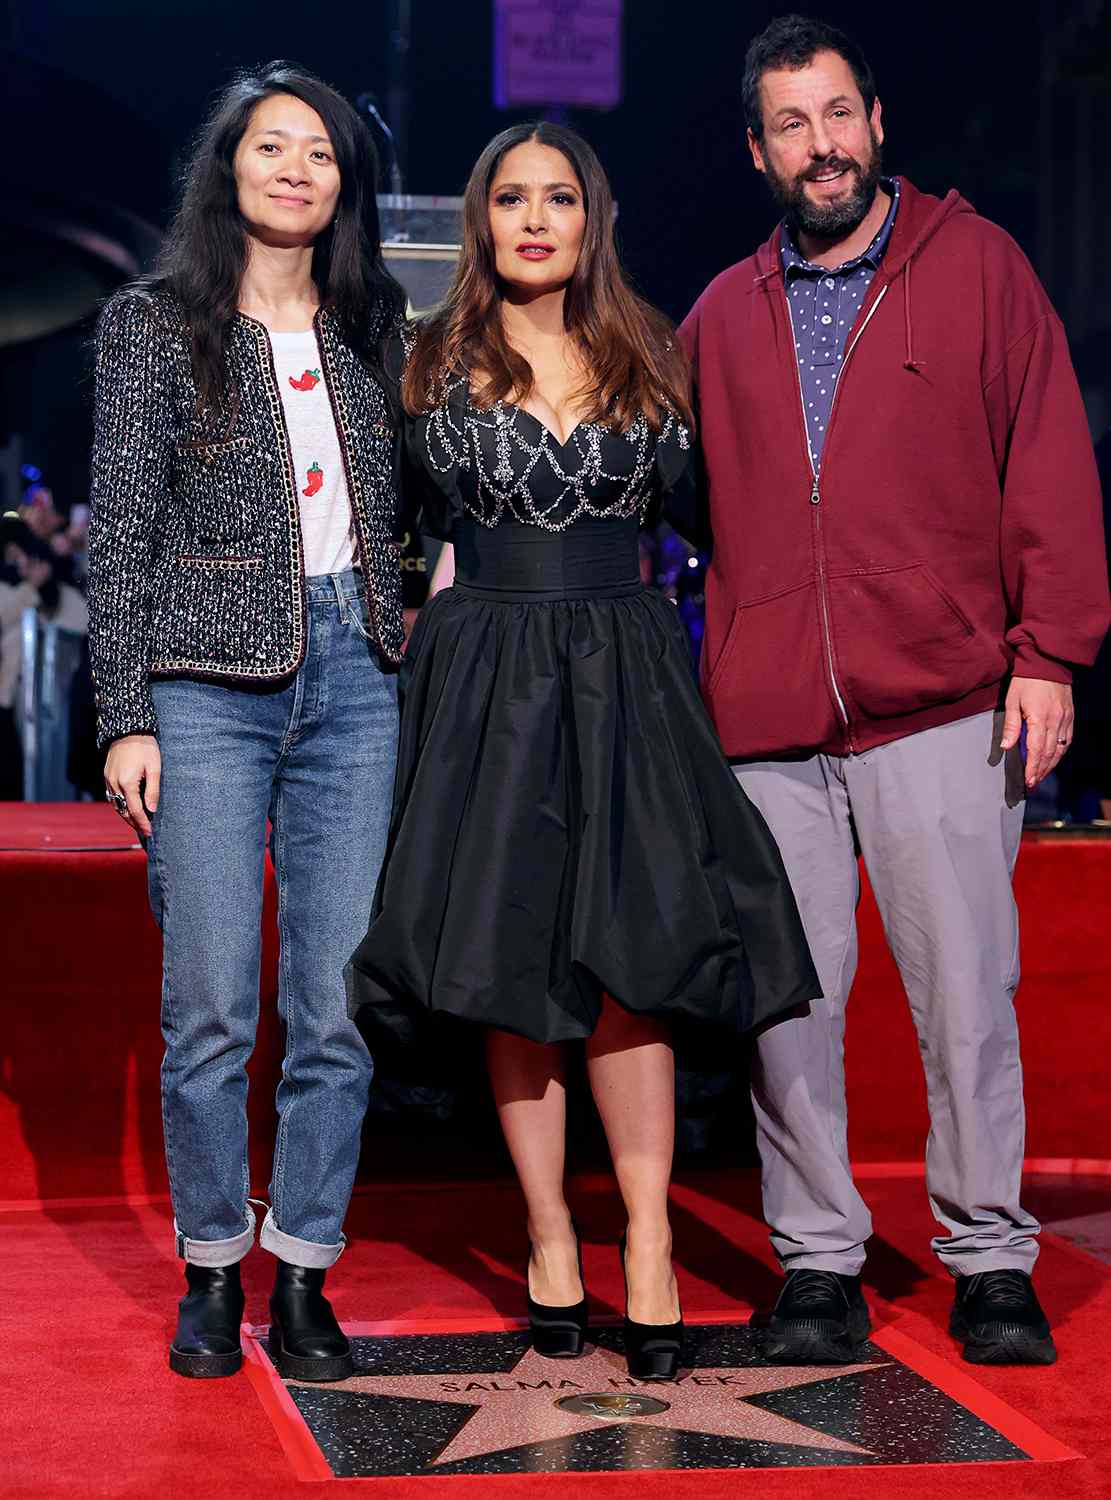 (L-R) Chloé Zhao, Salma Hayek Pinault and Adam Sandler attend the Hollywood Walk of Fame Star Ceremony for Salma Hayek Pinault on November 19, 2021 in Los Angeles, California.